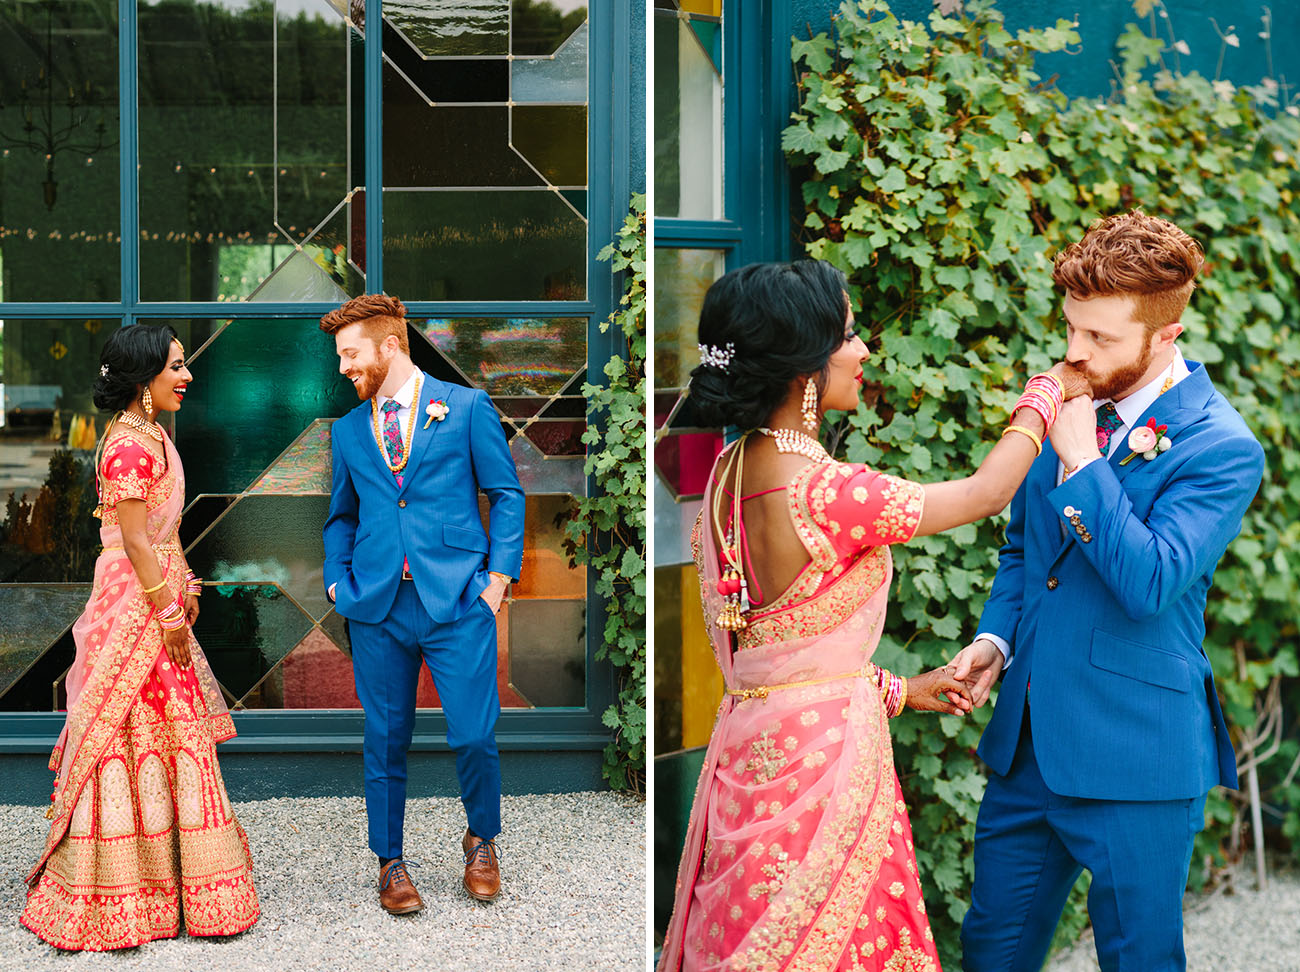 The groom was wearing a bold blue suit, a bright tier and brown shoes